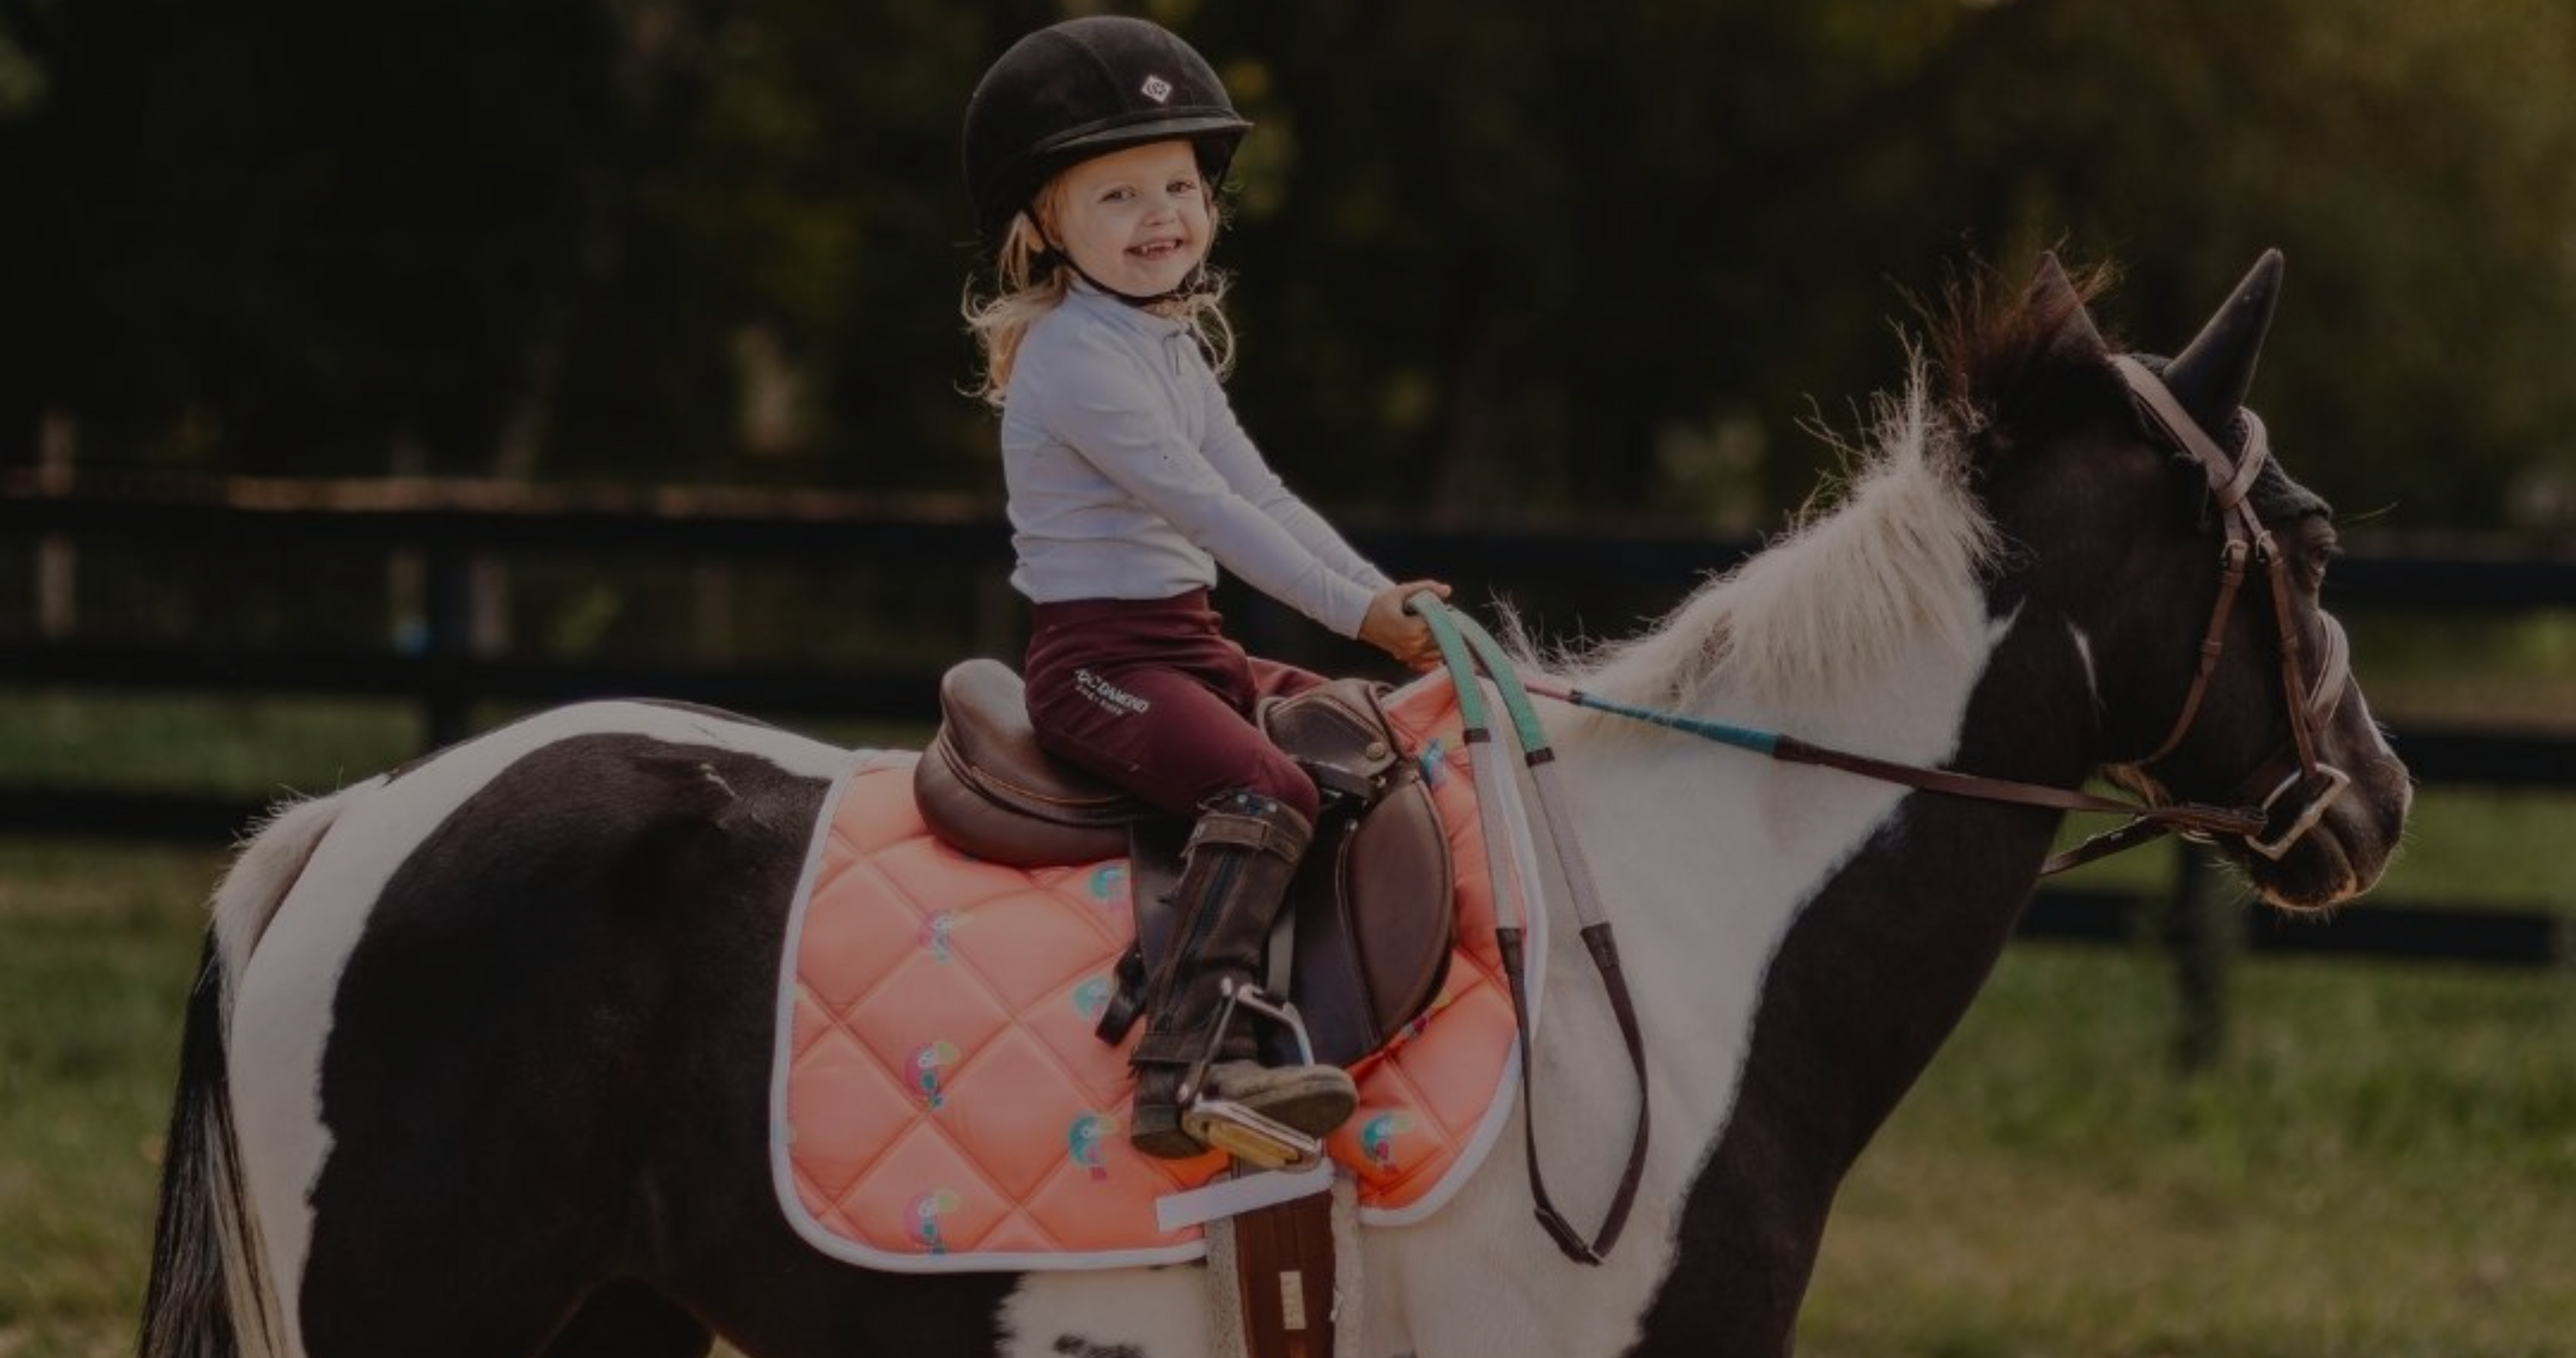 Equestrian Gifts for the Grandkids